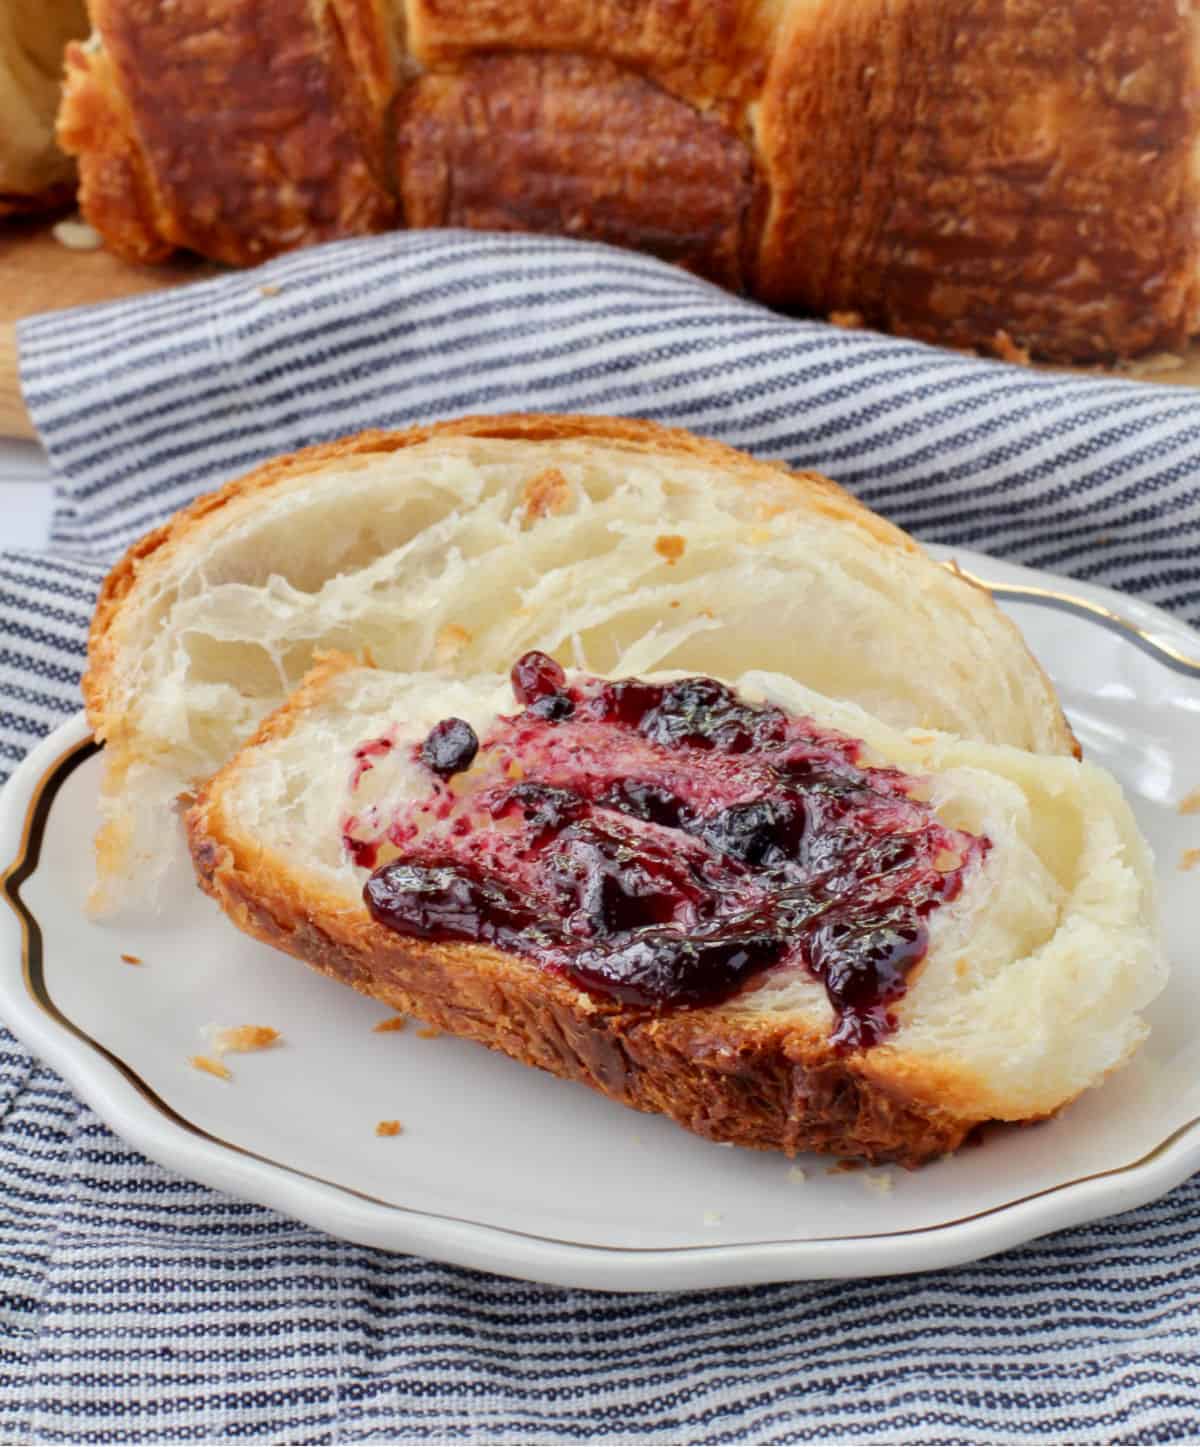 Croissant Bread slice with jam on it.